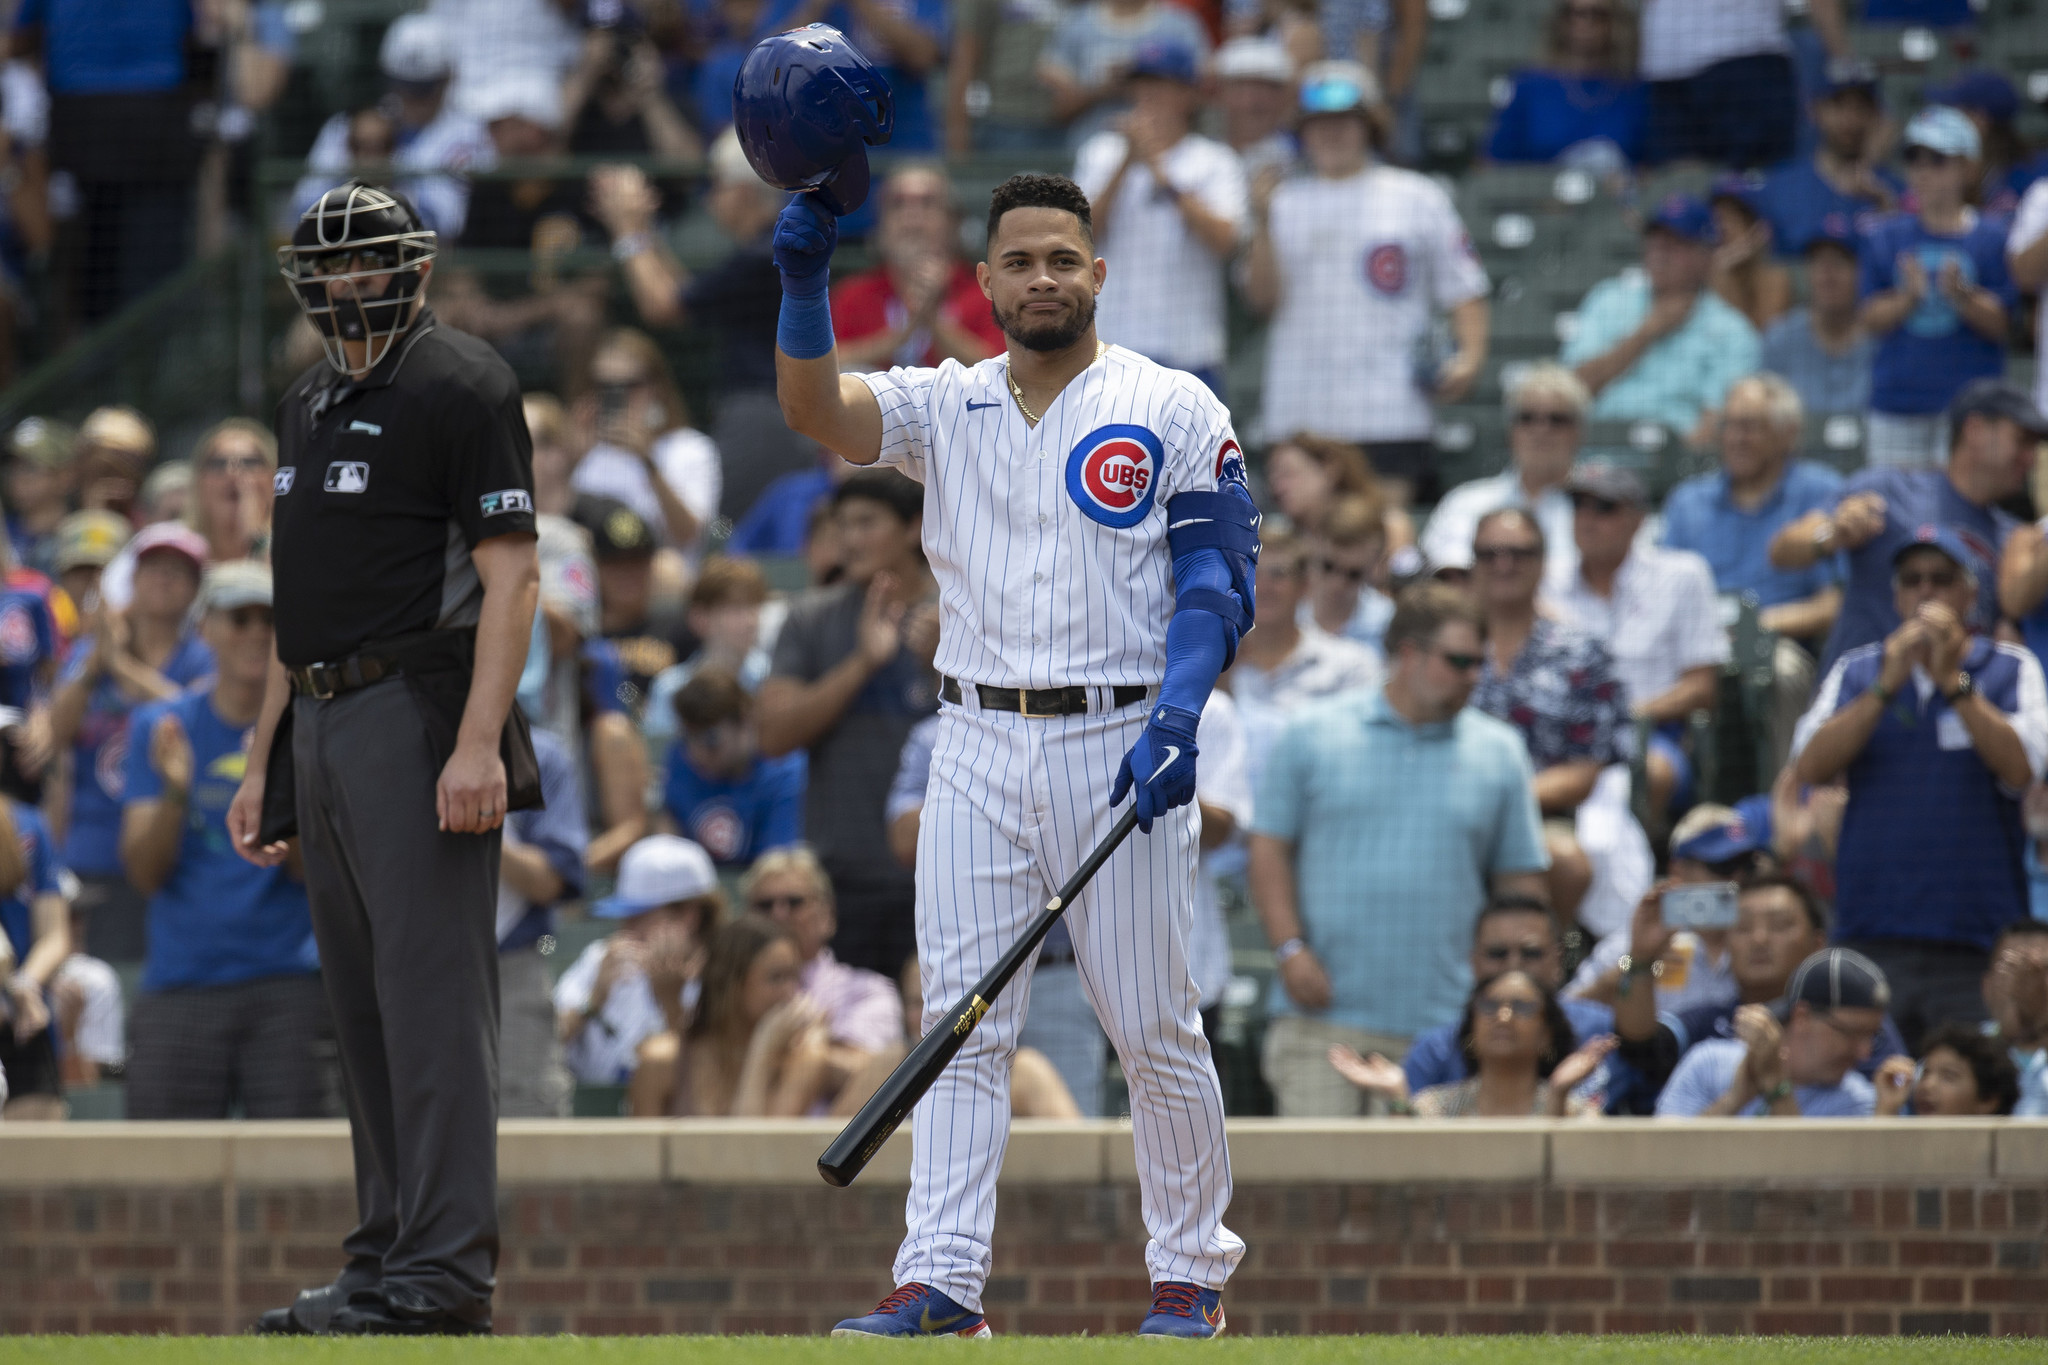 Reports: Cardinals agree to deal with catcher Wilson Contreras